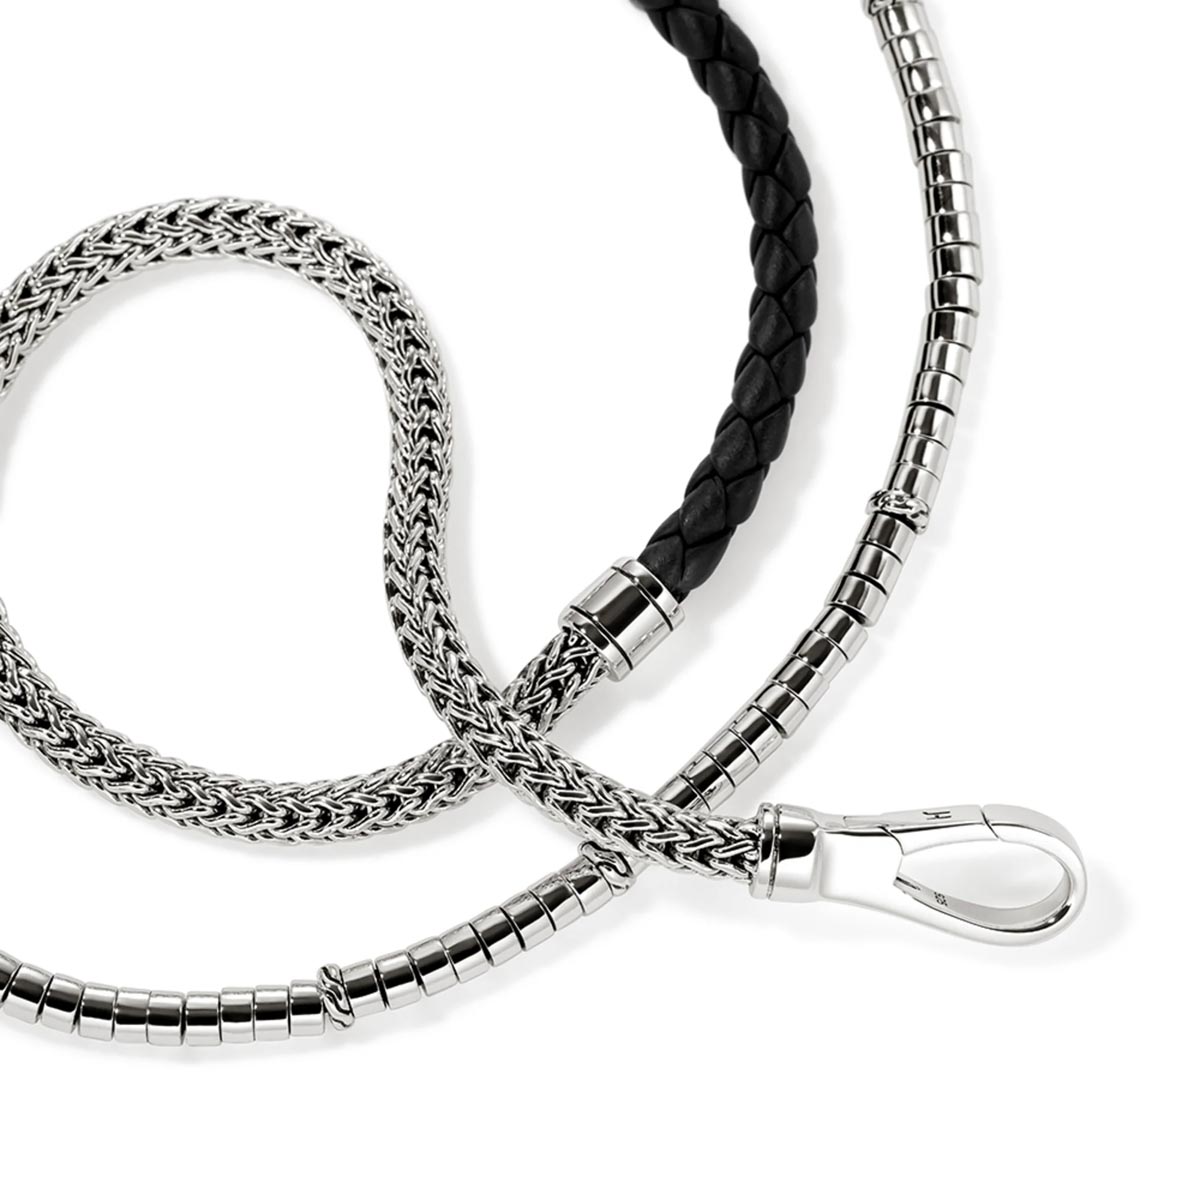 John Hardy Classic Chain Collection Heishi Triple Wrap Bracelet in Sterling Silver and Black Leather